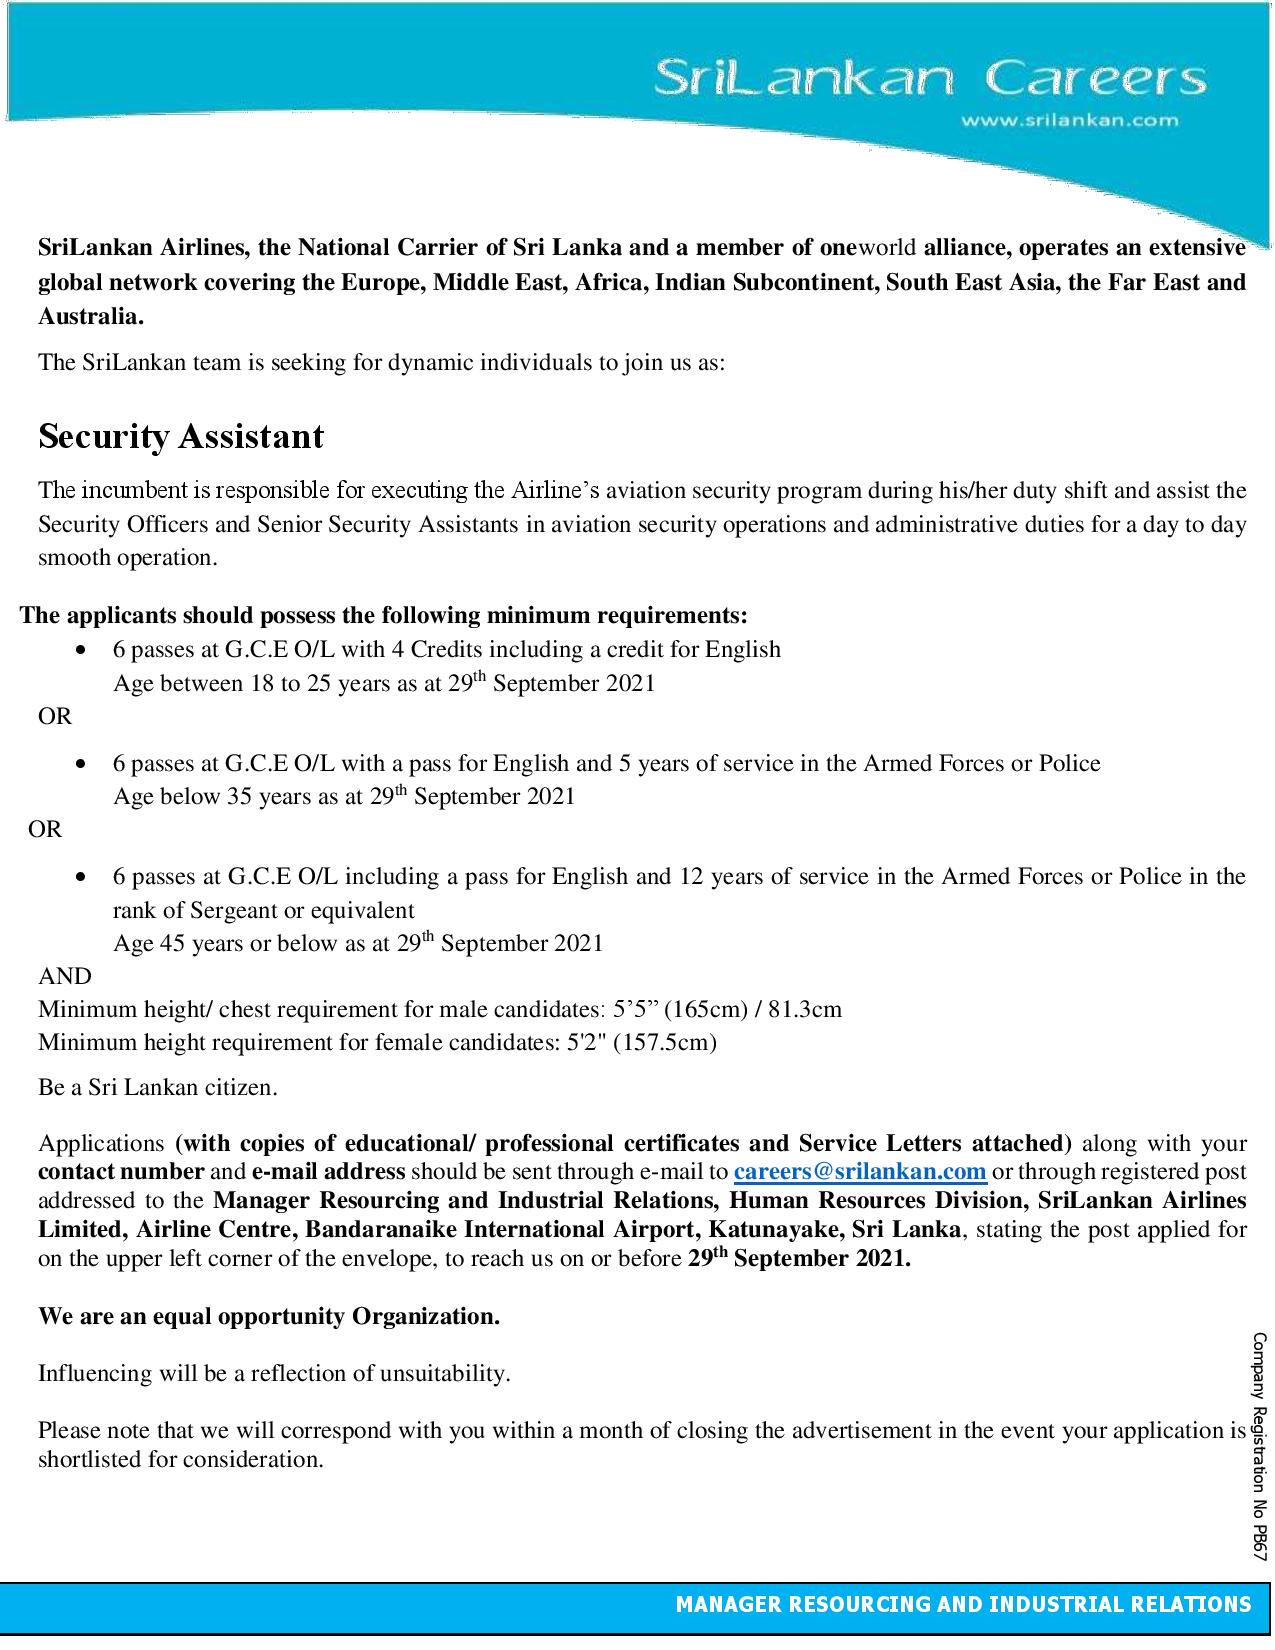 Security Assistant - Sri Lankan Airlines